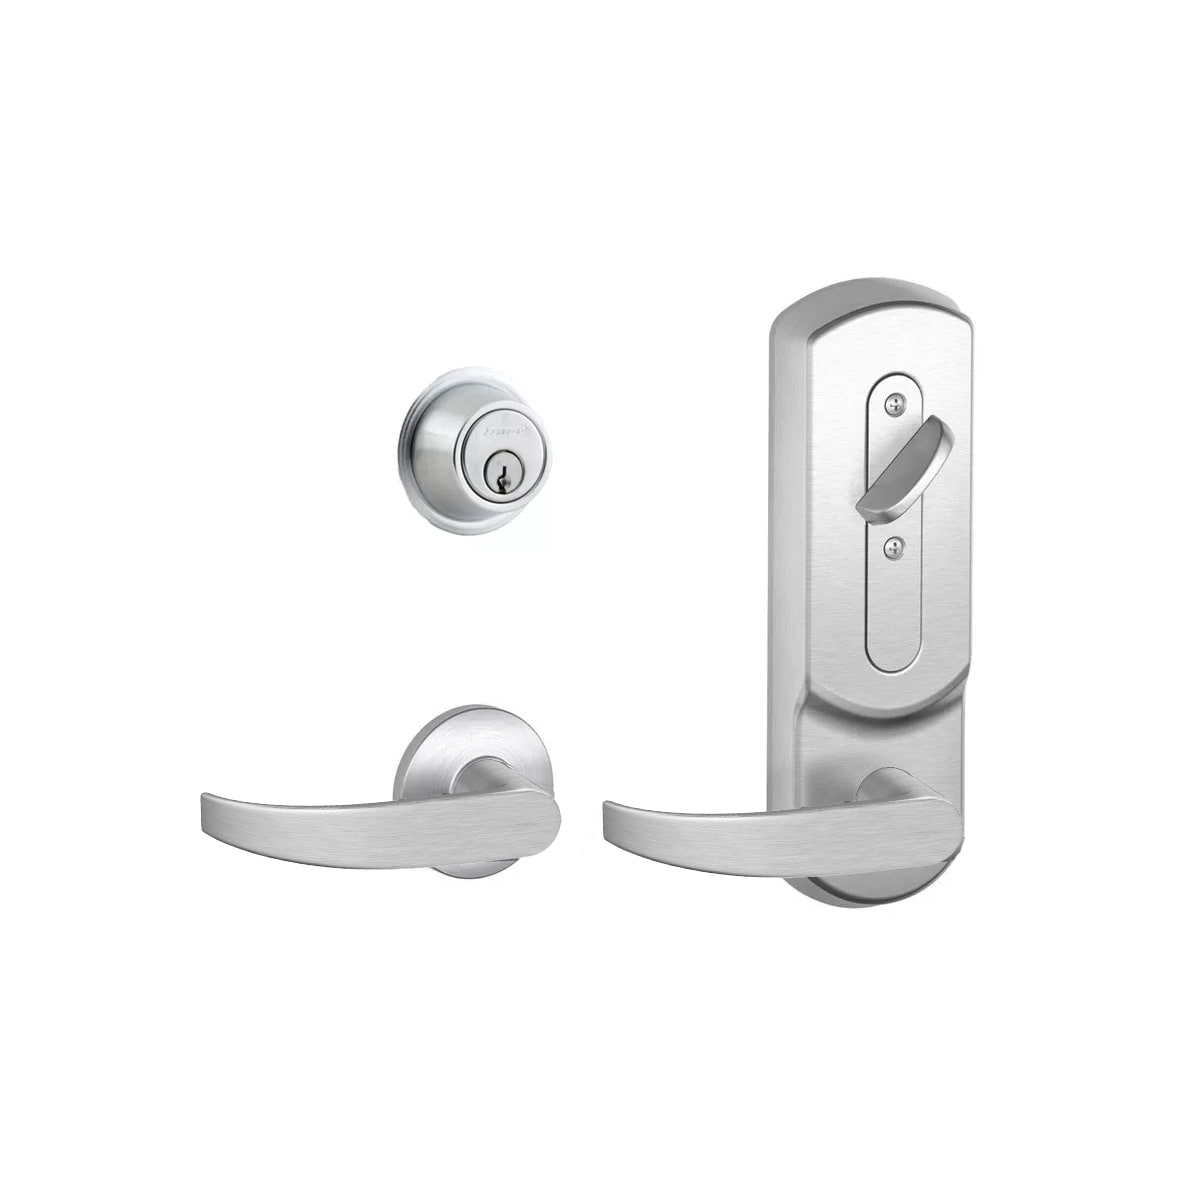 Schlage S210PD Interconnected Lock